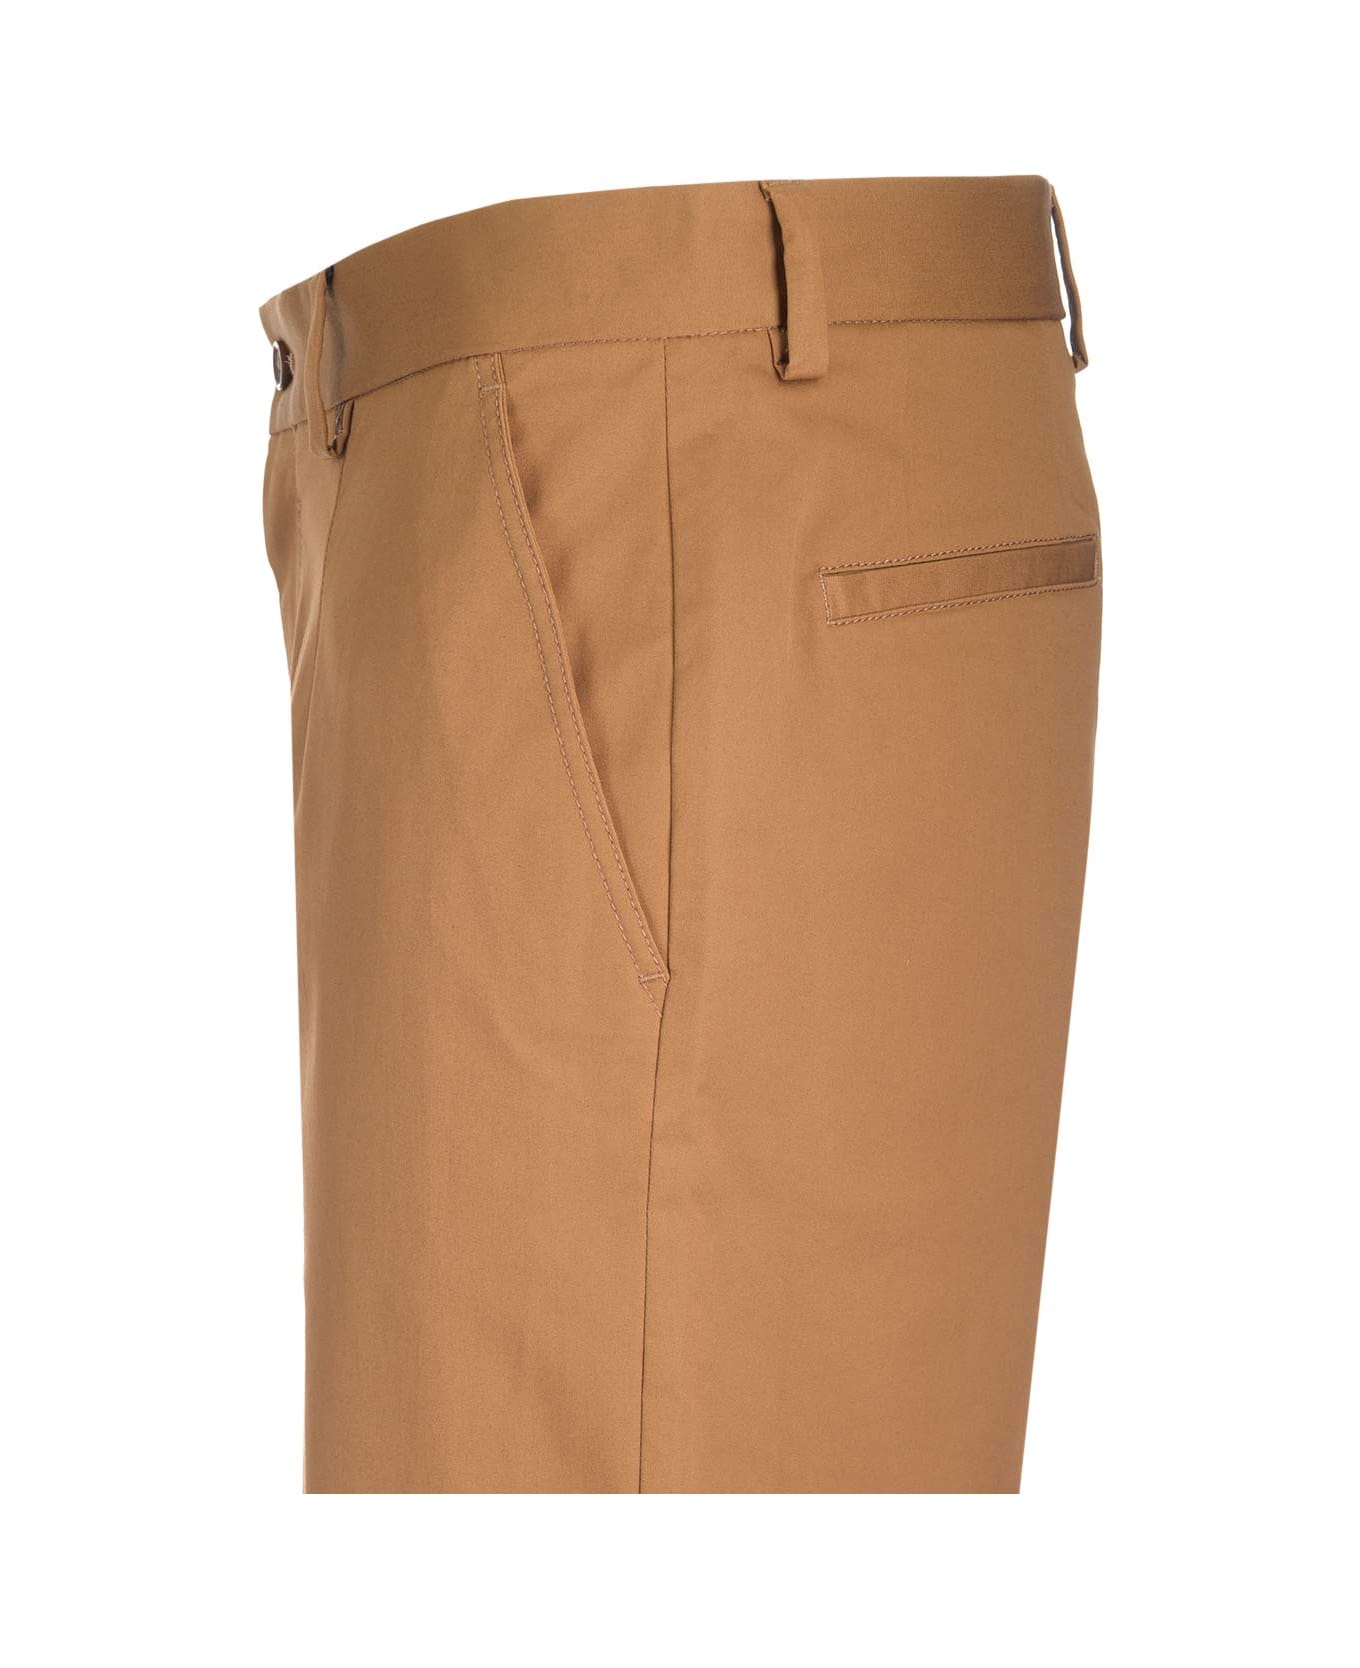 Dolce & Gabbana Roma Trousers - Brown ボトムス